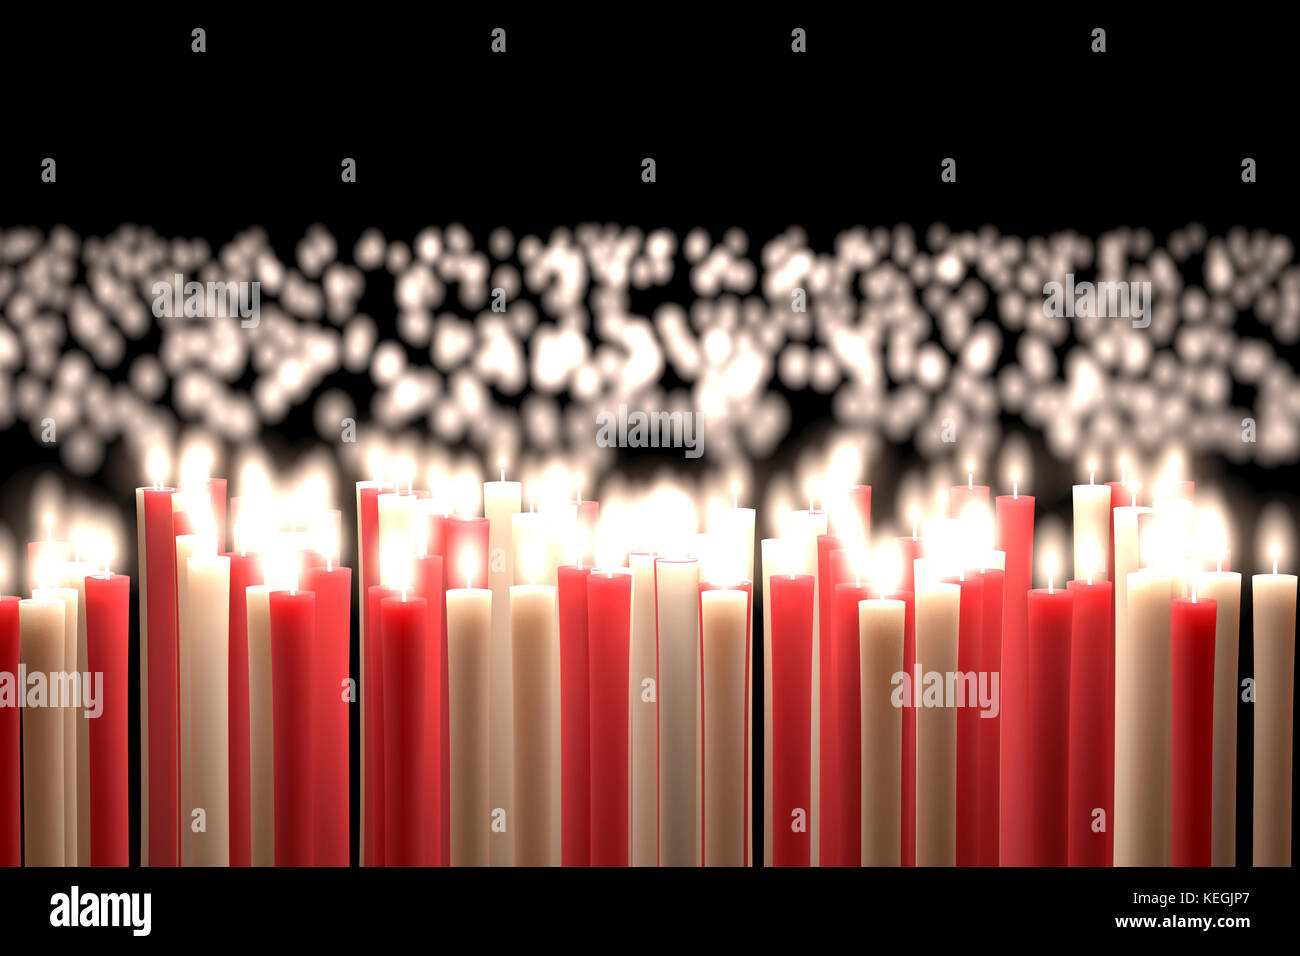 Candlelight, Red & White Candles Stock Photo